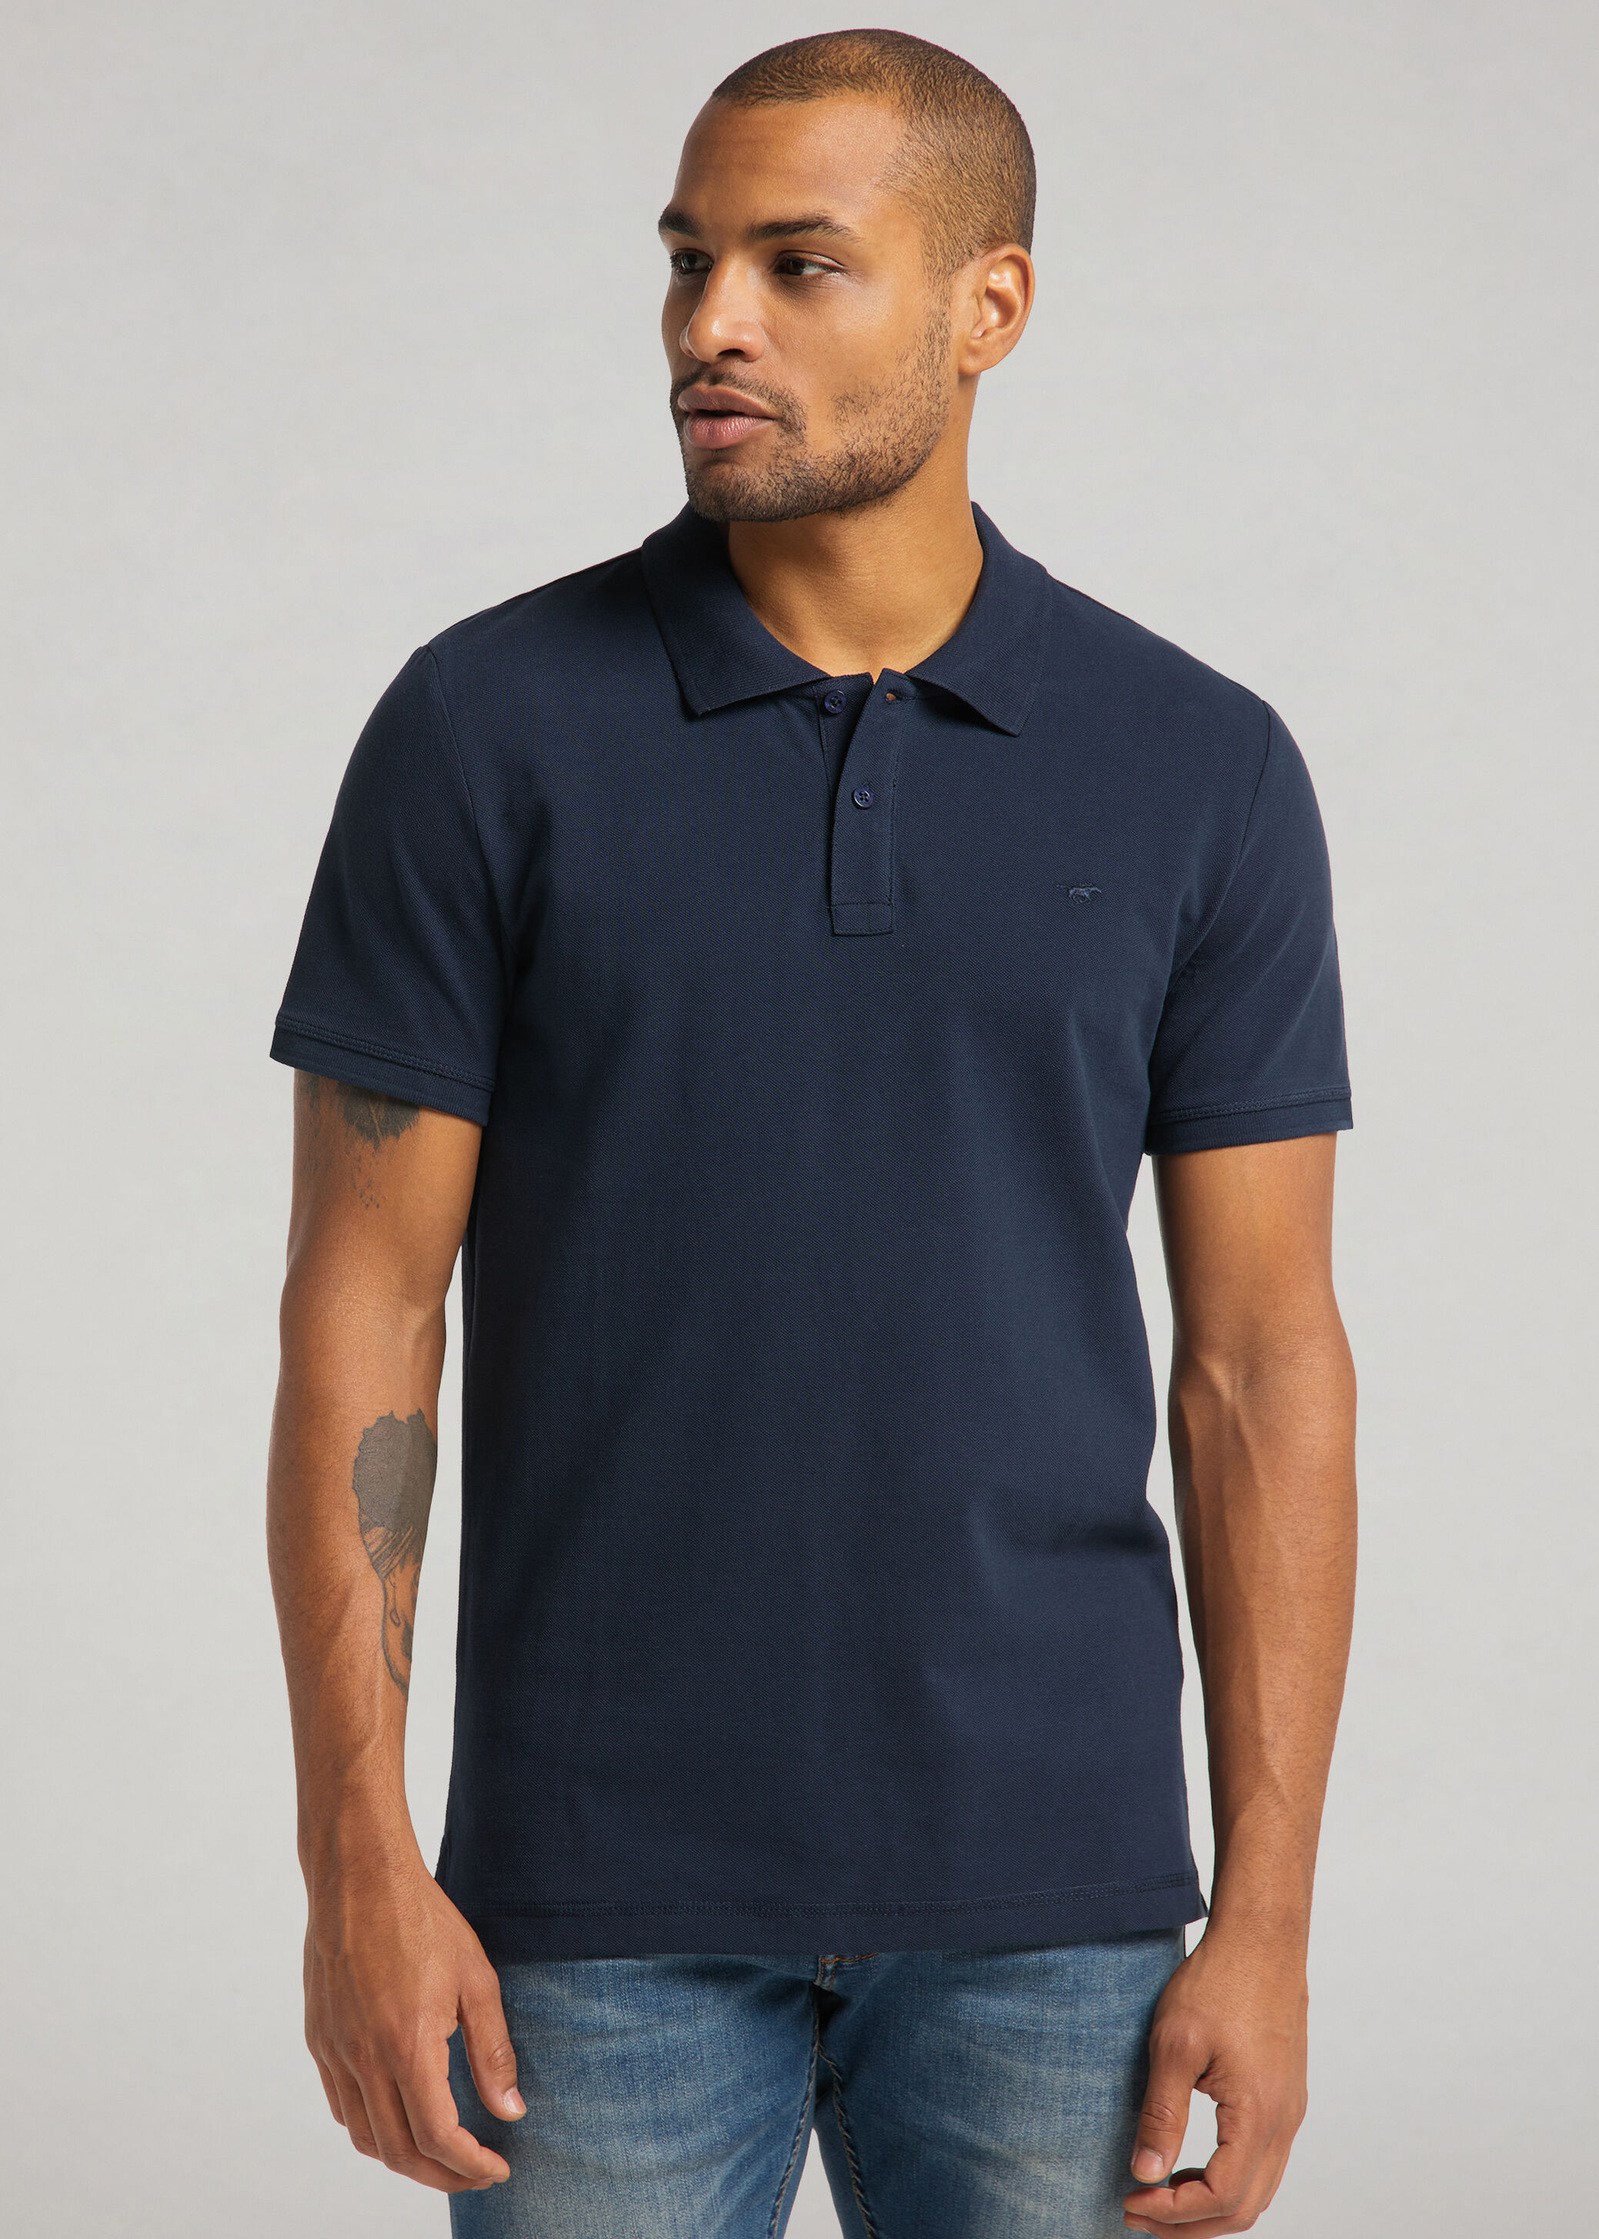 - Sapphire Polo 1008810-4136 Dark Size Mustang M